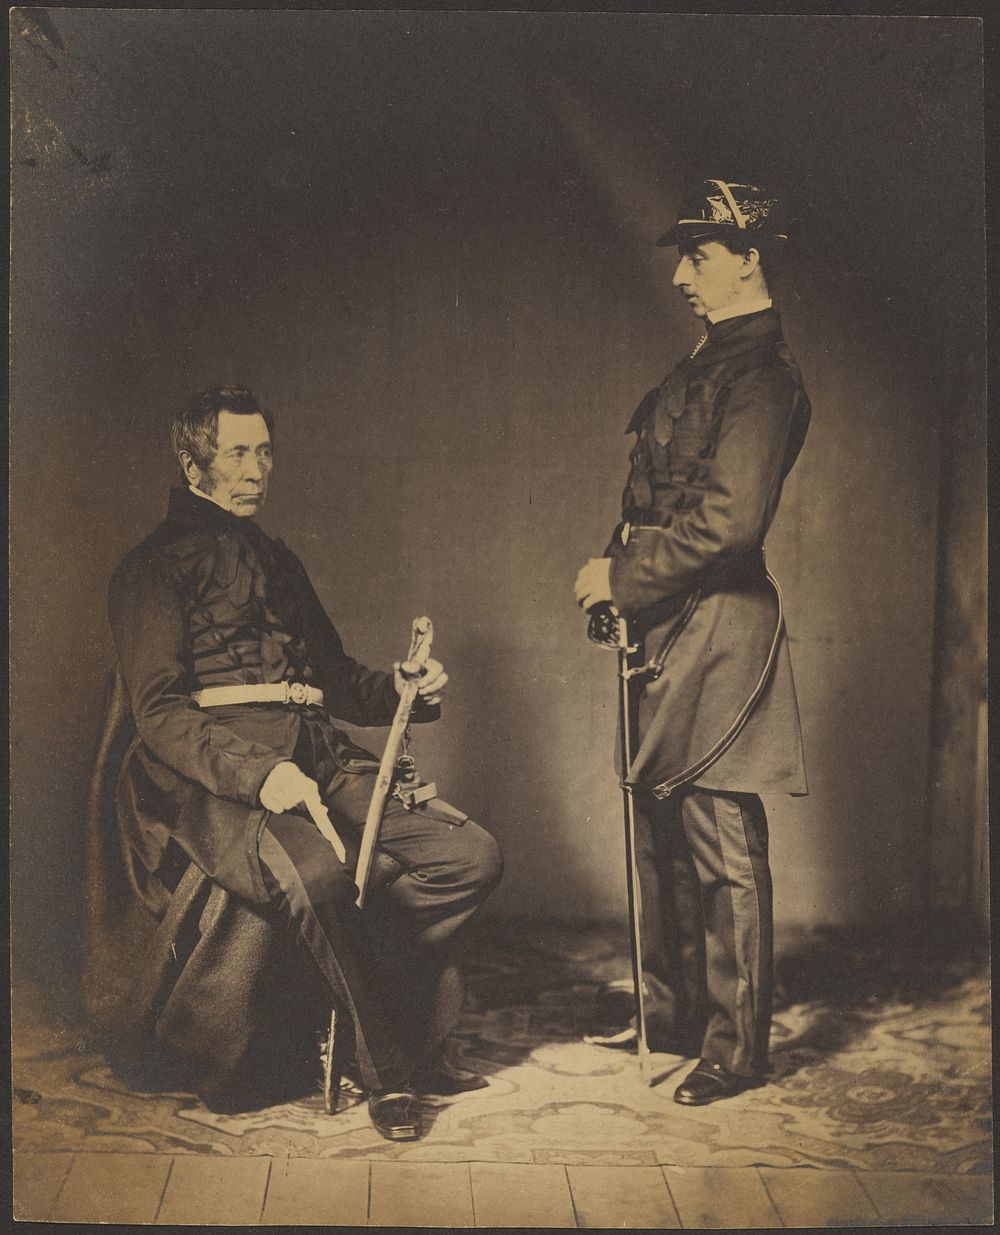 Lt. Gen. Sir Burgoyne, G.C.B. Seated in Dress Uniform with Aide to his Right by Roger Fenton